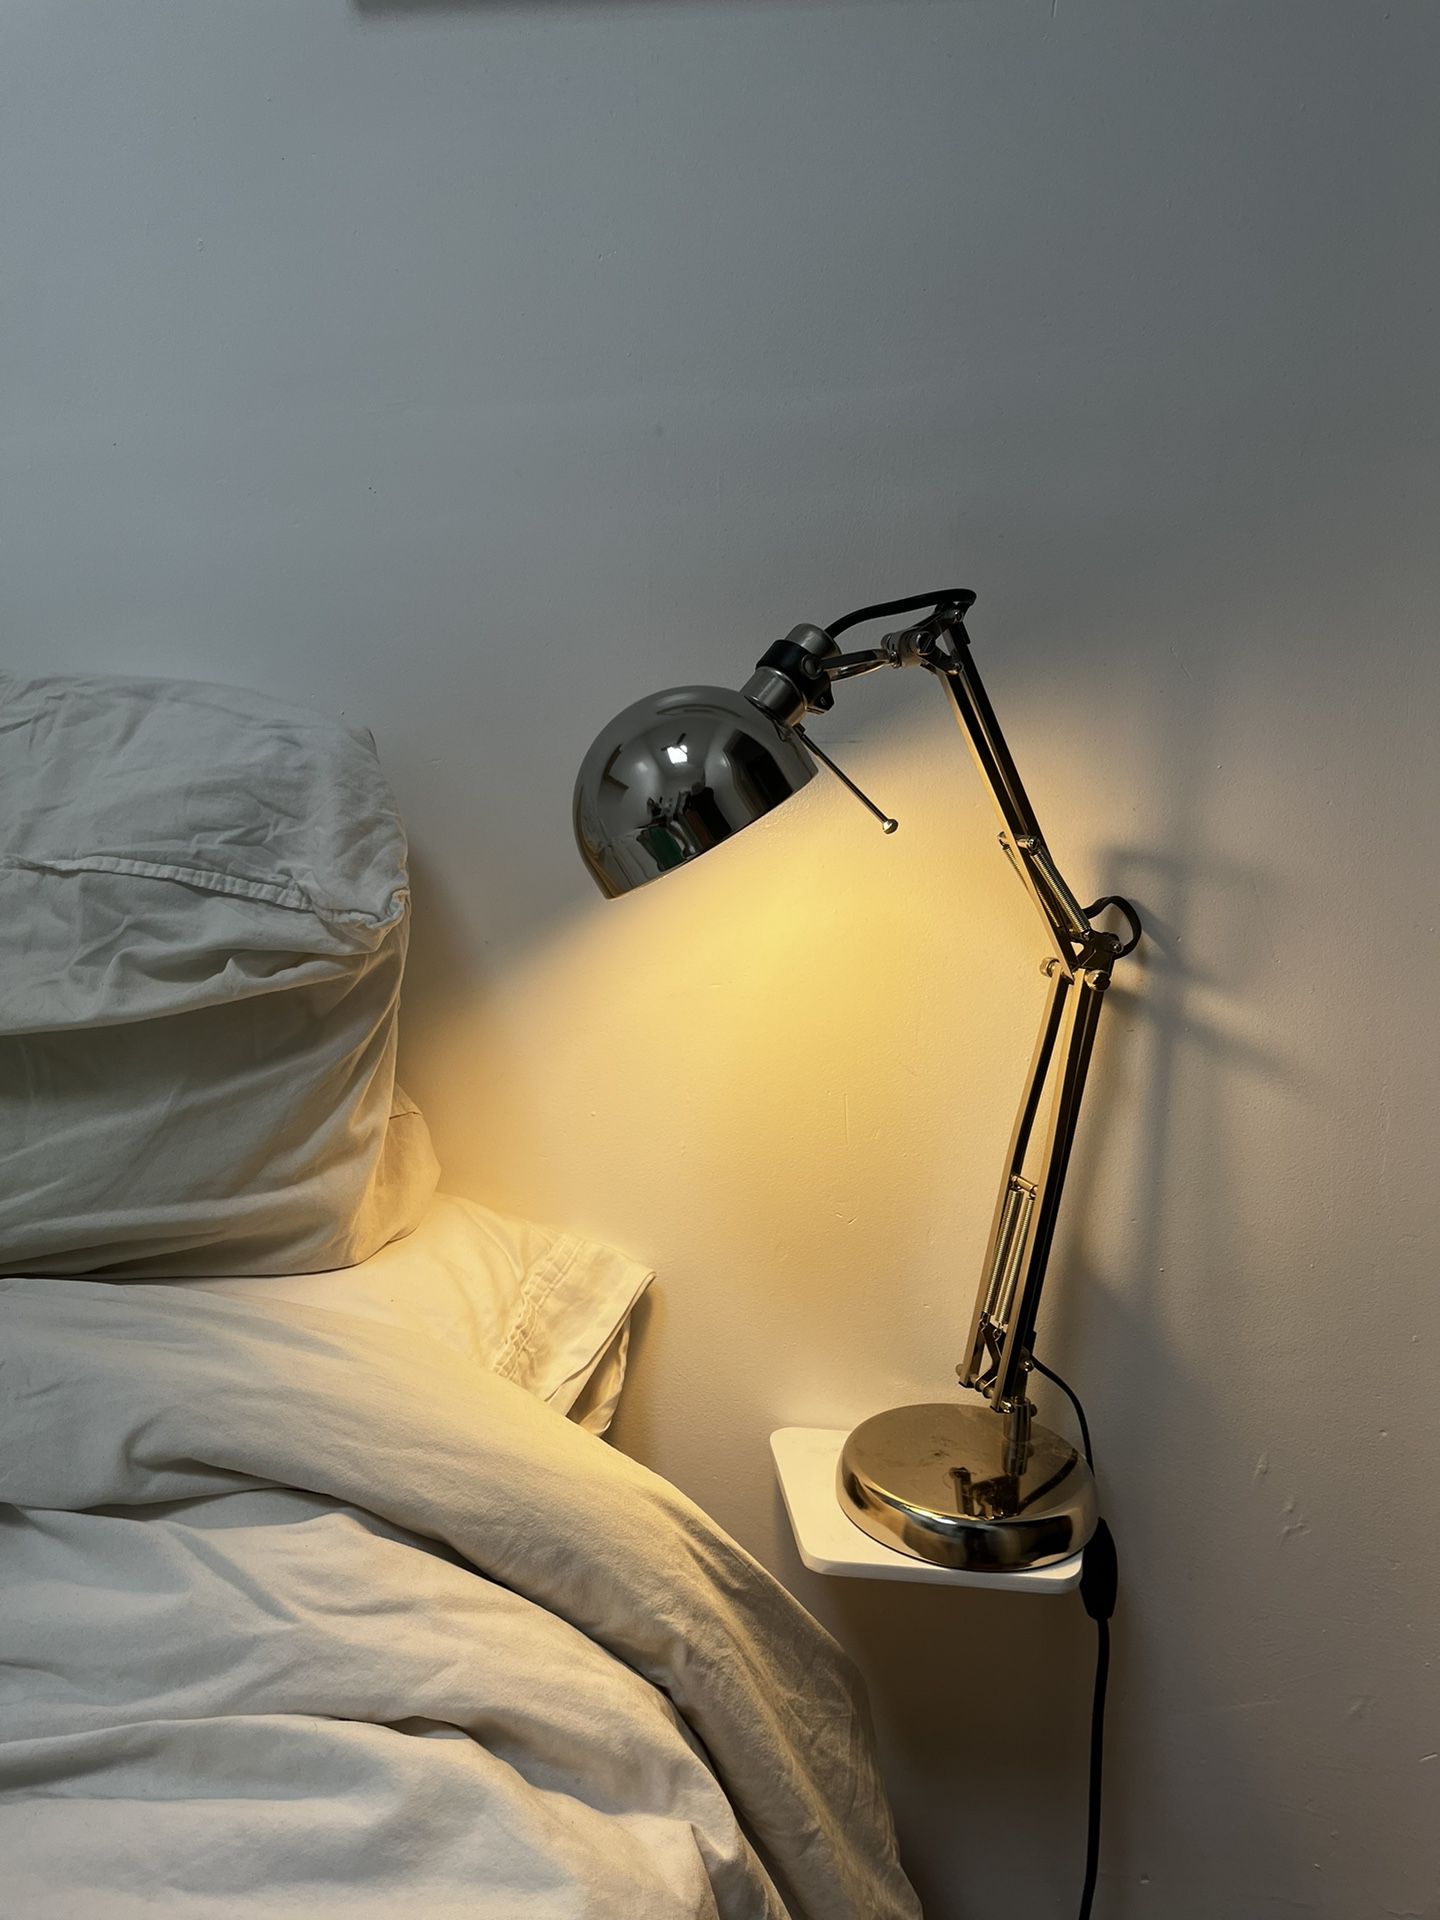 Small Desk or Bed Lamp